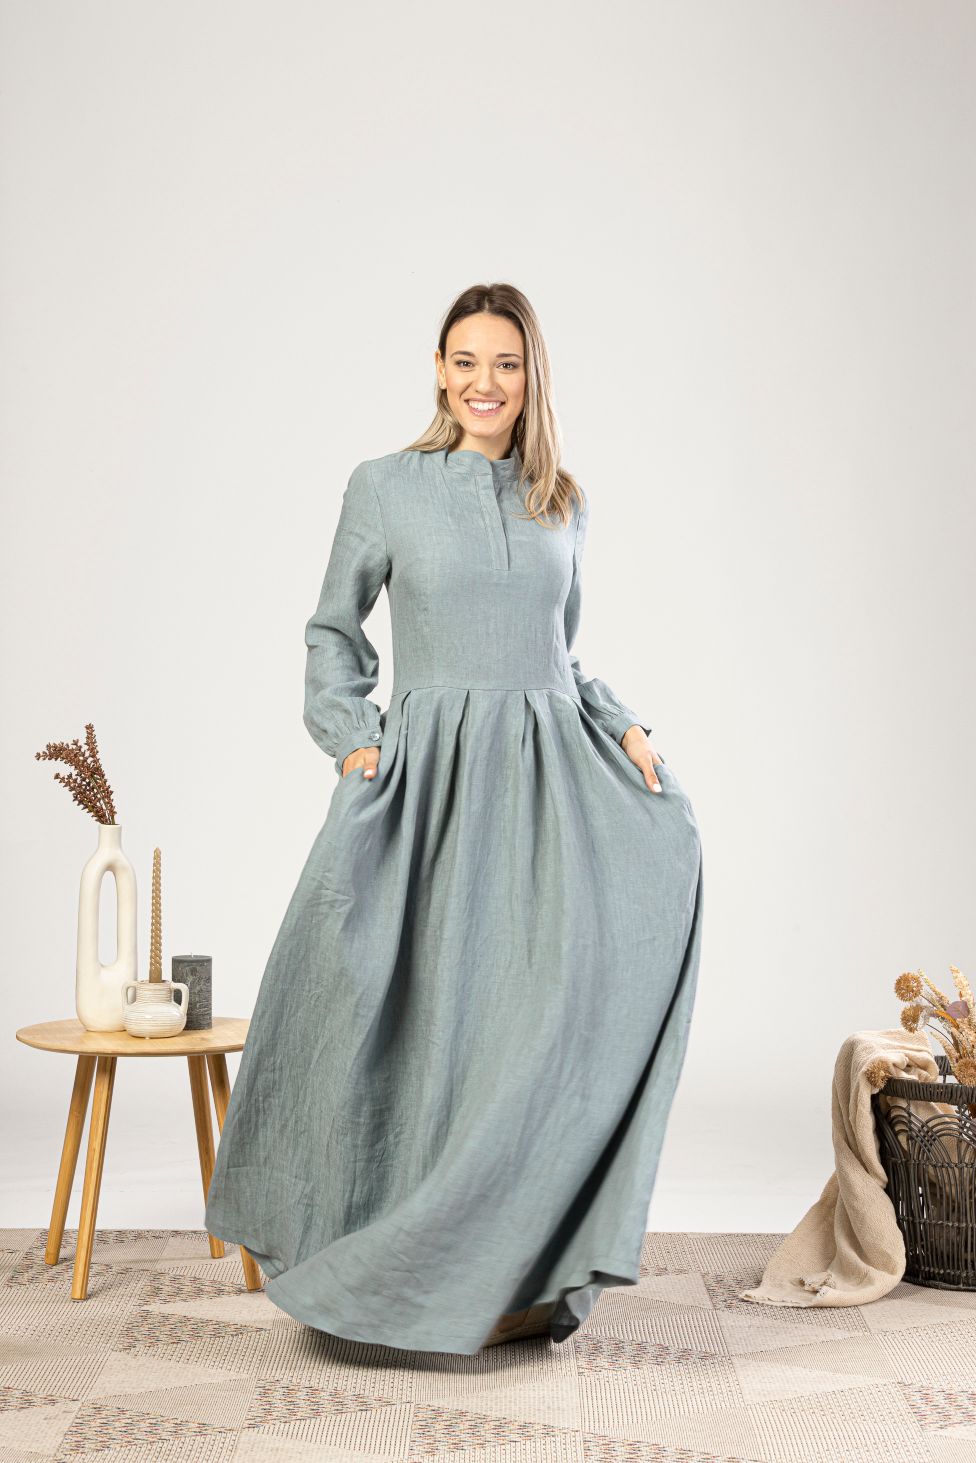 Dusty Blue Linen Prairie Maxi Dress for summer warm days - from NikkaPlace | Effortless fashion for easy living